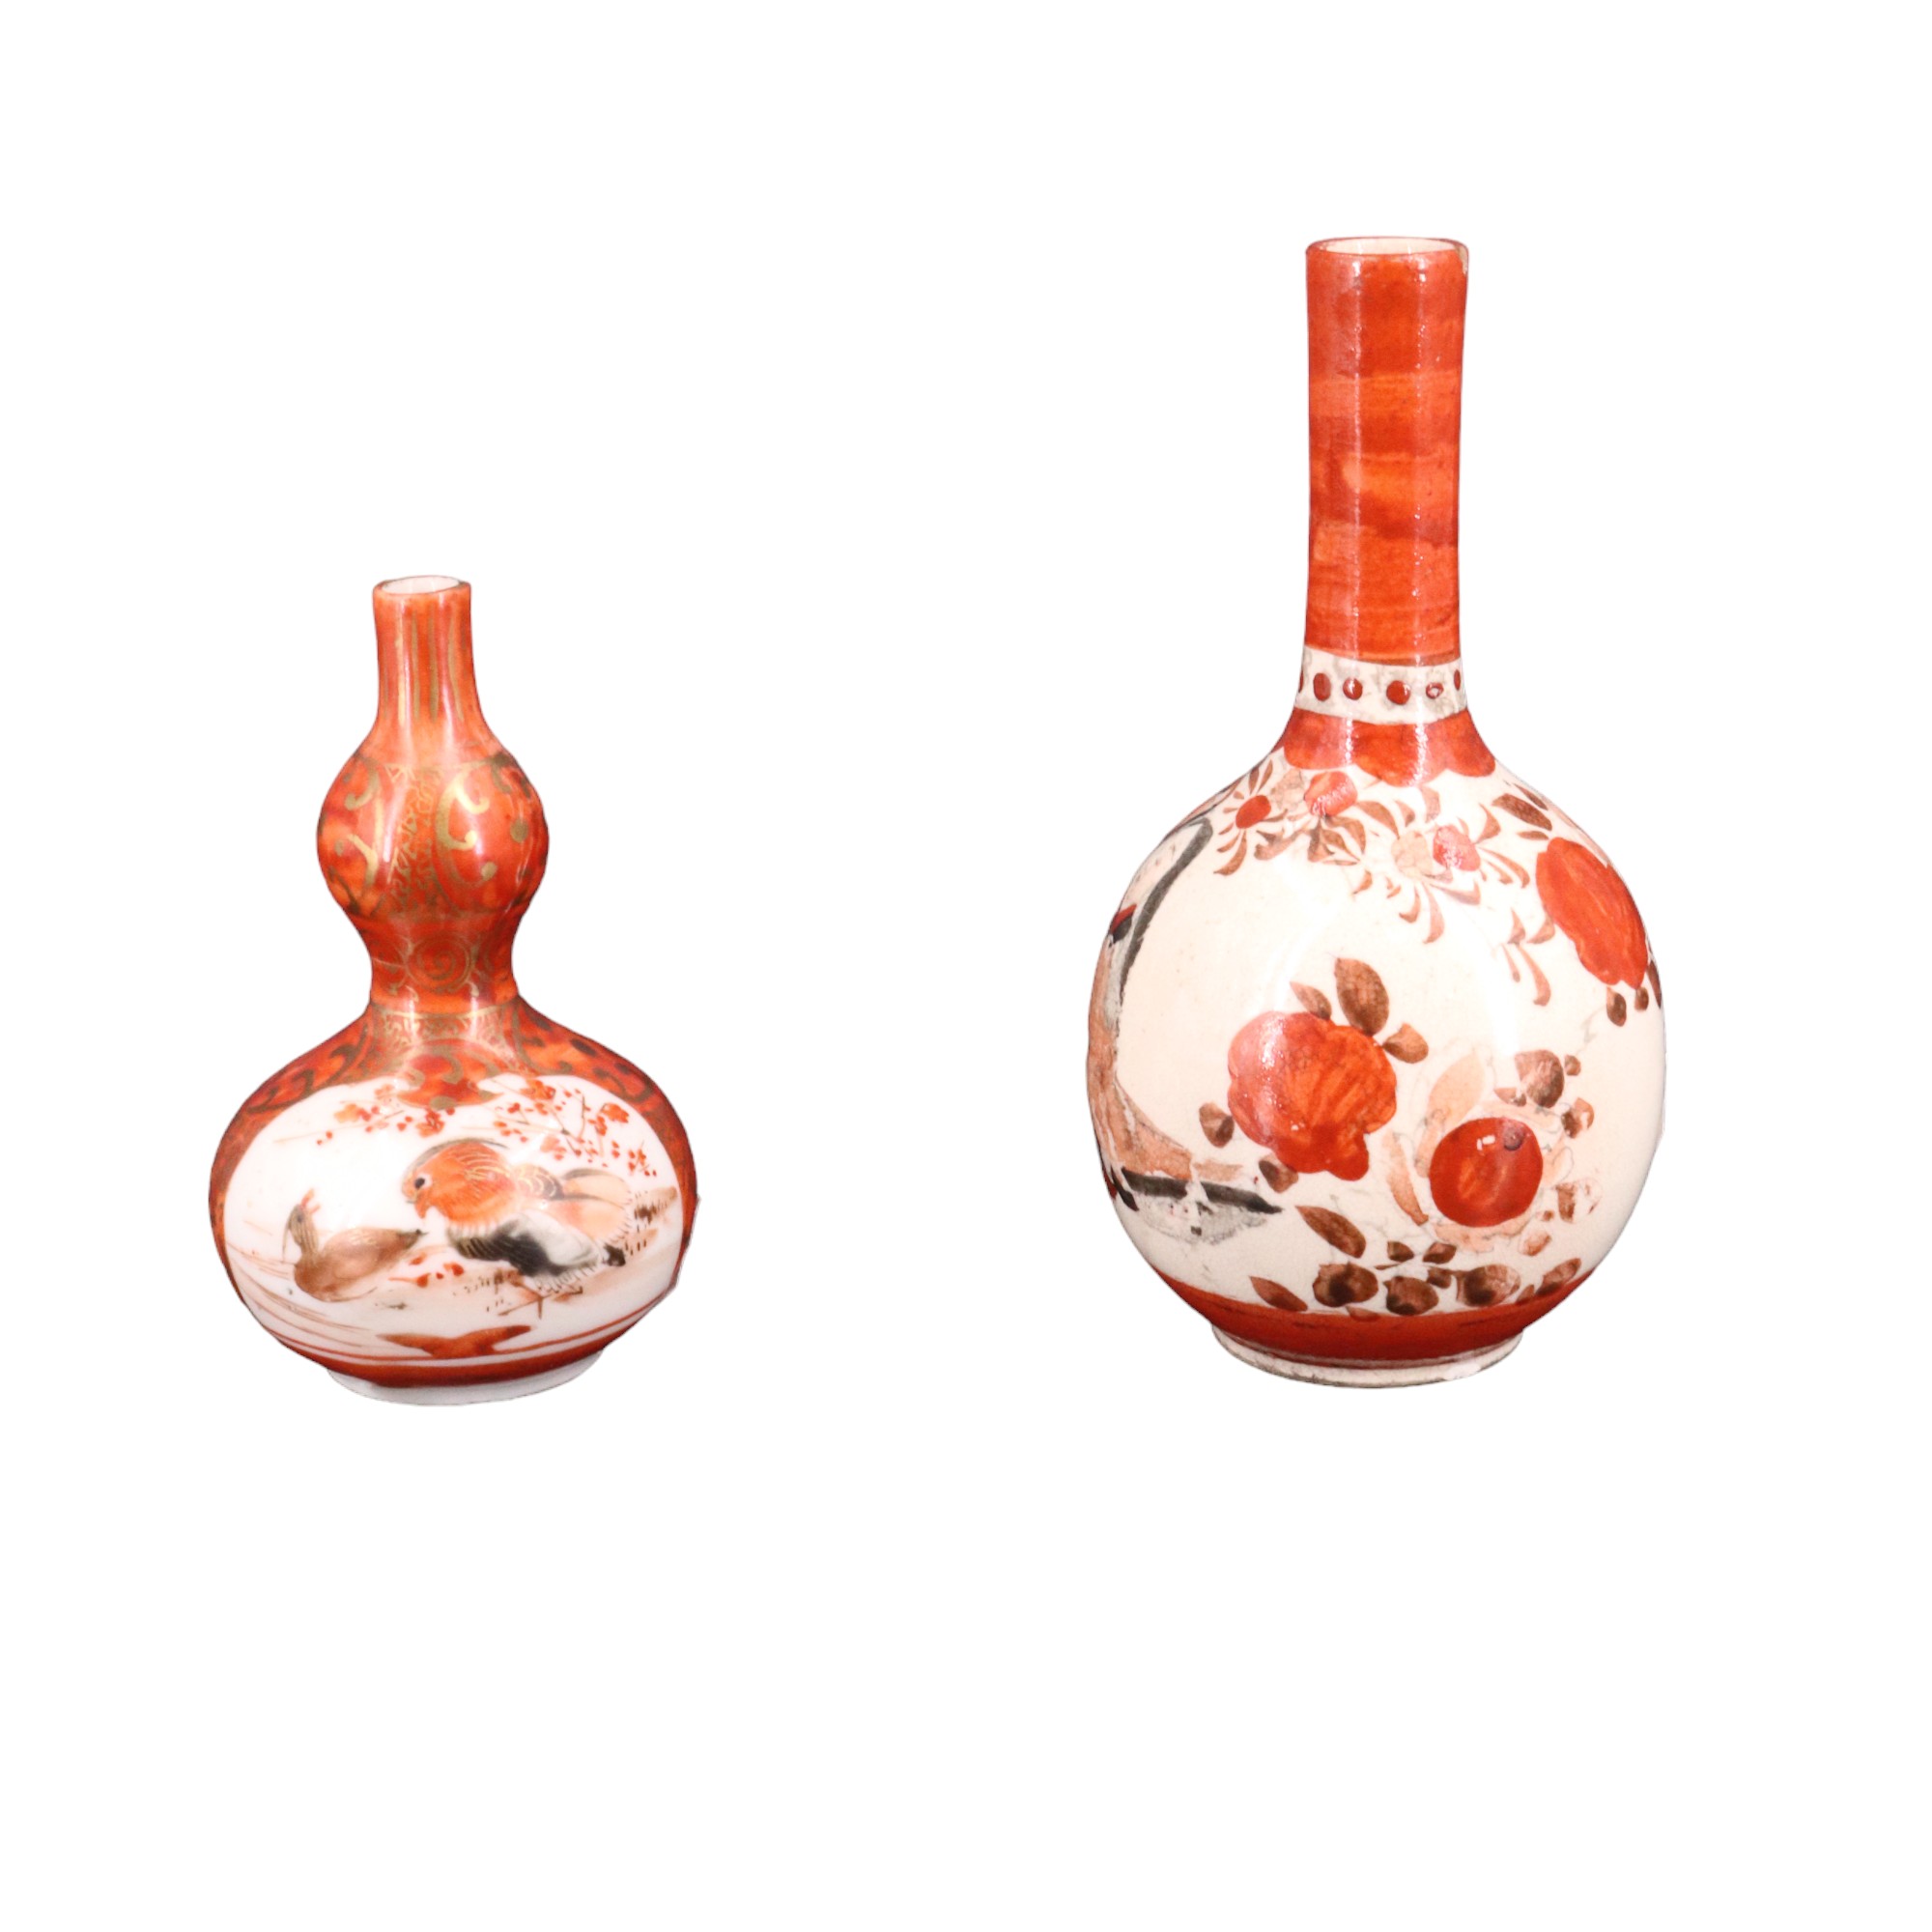 A Meiji / Taisho Japanese miniature porcelain double-gourd bottle vase, 8.5 cm, together with a - Image 3 of 4